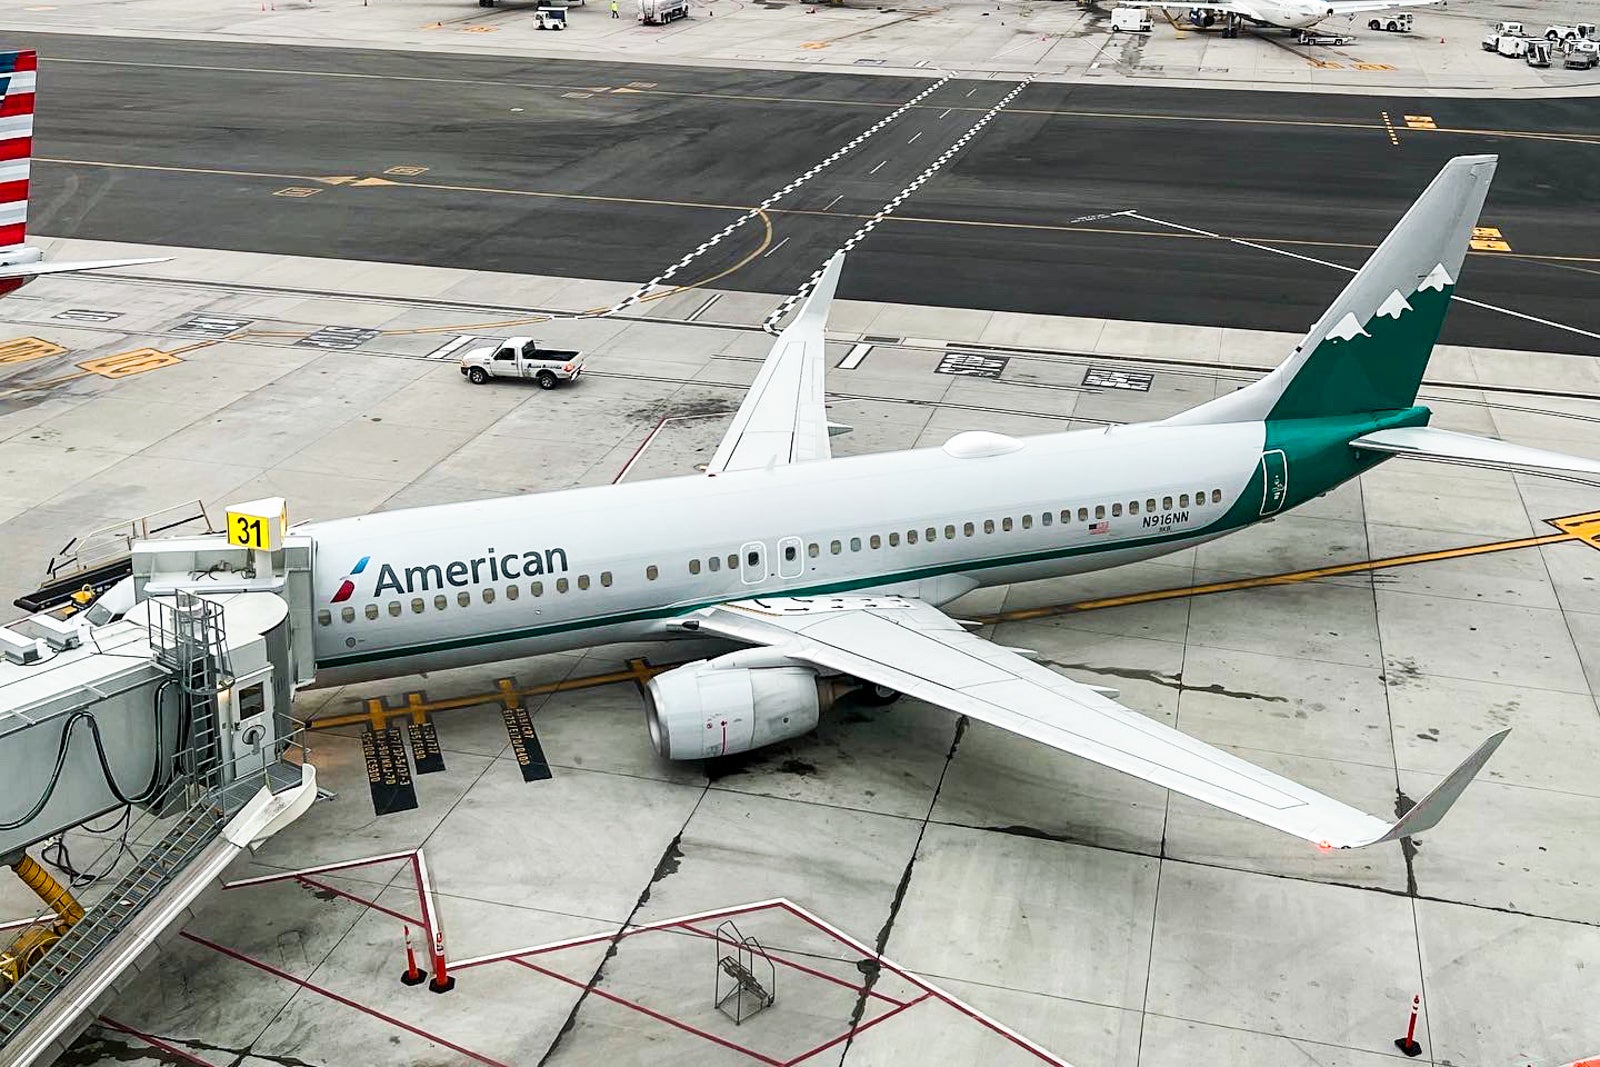 American Airlines Reno Air special livery on a Boeing 737.